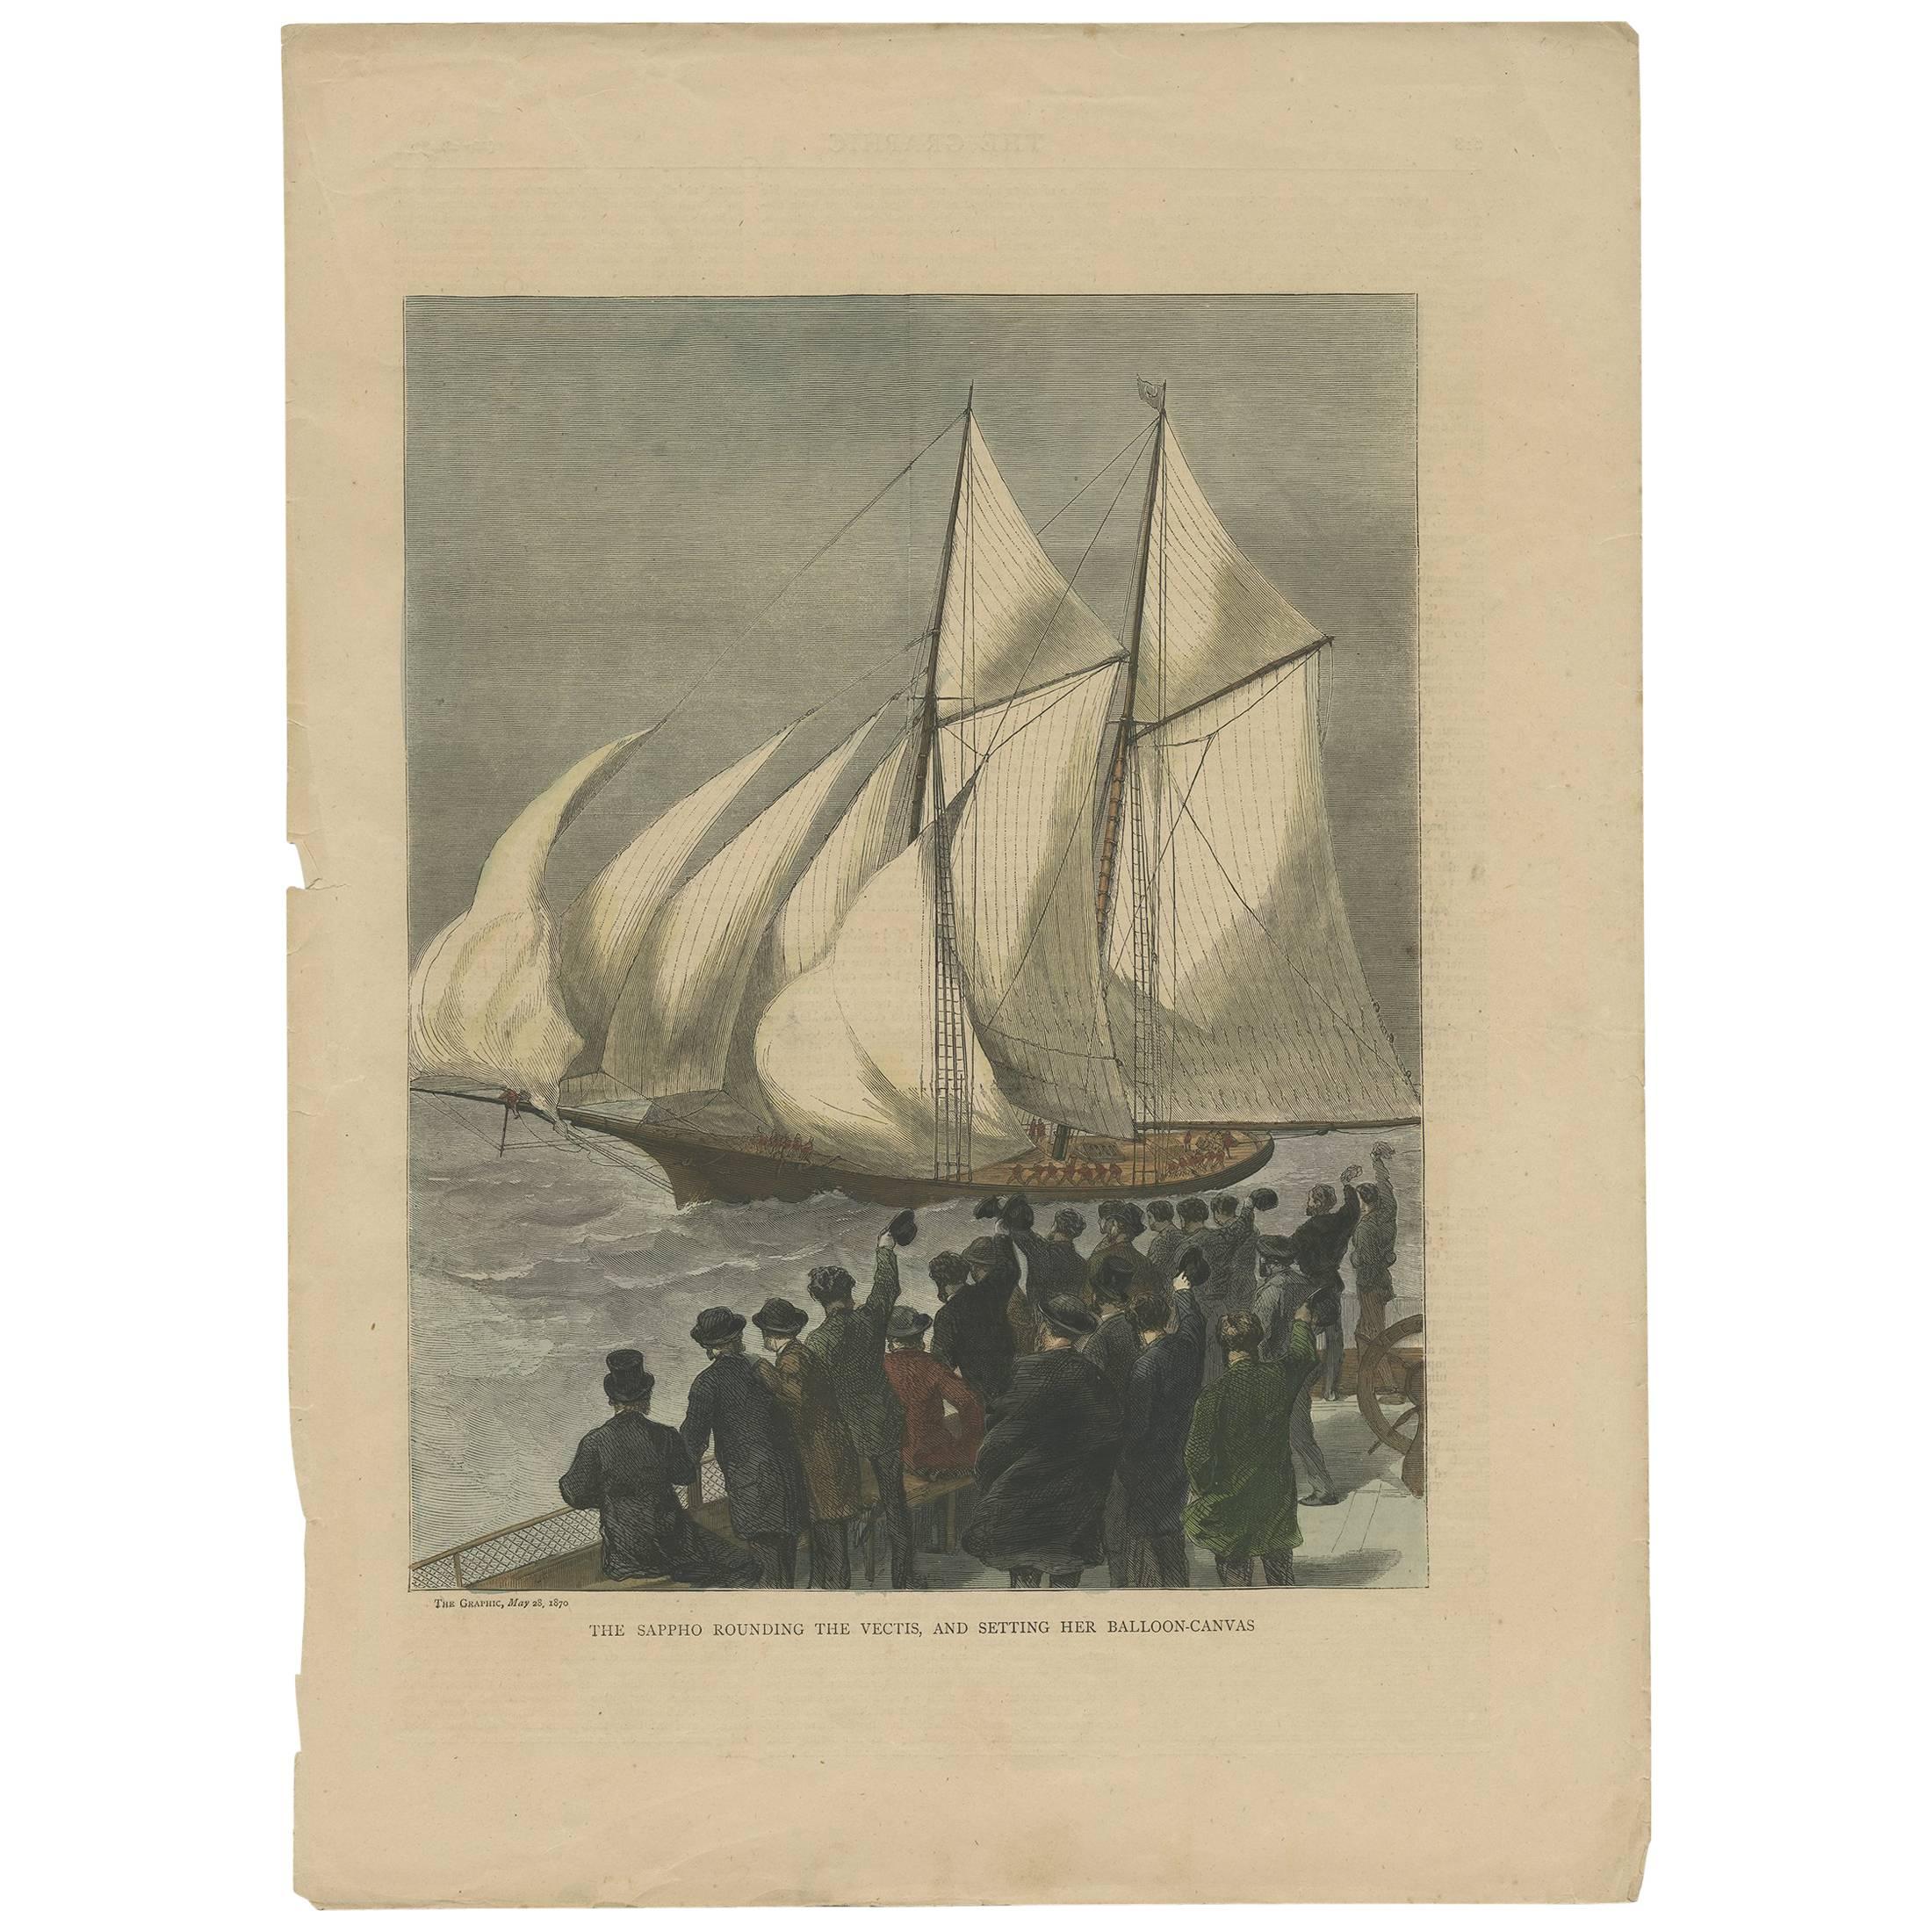 Antique Boat Print of the Sappho Rounding the Vectis by the Graphic, 1870 For Sale